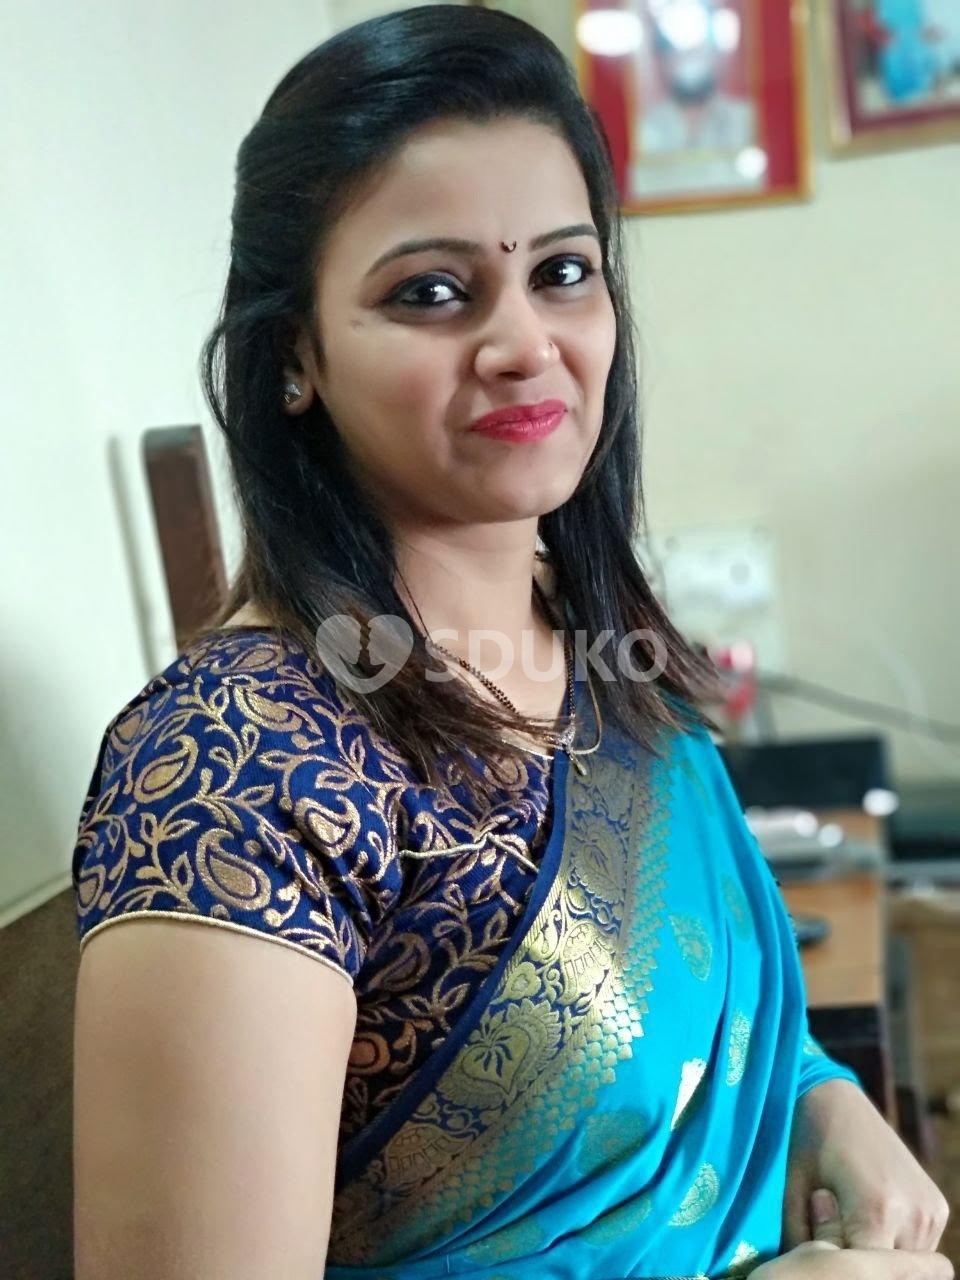 K k Nagar......... low price 🥰100% SAFE AND SECURE TODAY LOW PRICE UNLIMITED ENJOY HOT COLLEGE GIRL HOUSEWIFE AUNTIES